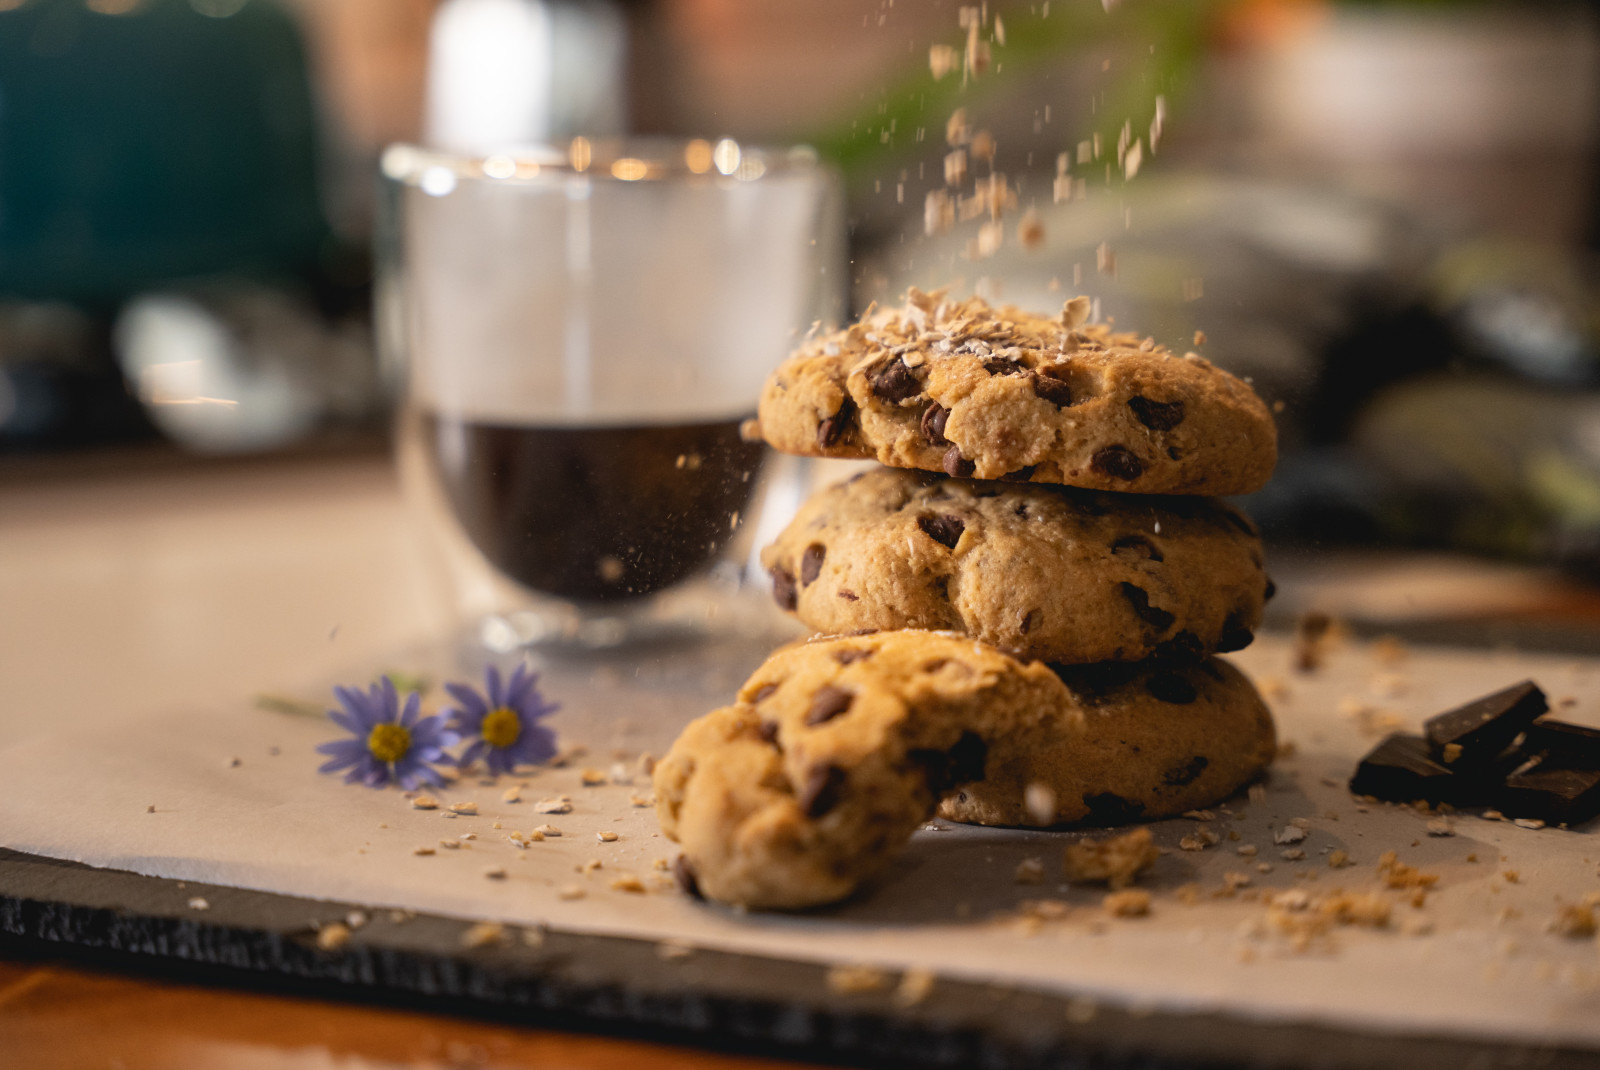 A stack of chocolate chip cookies on a plate with purple flowers and warm beverage